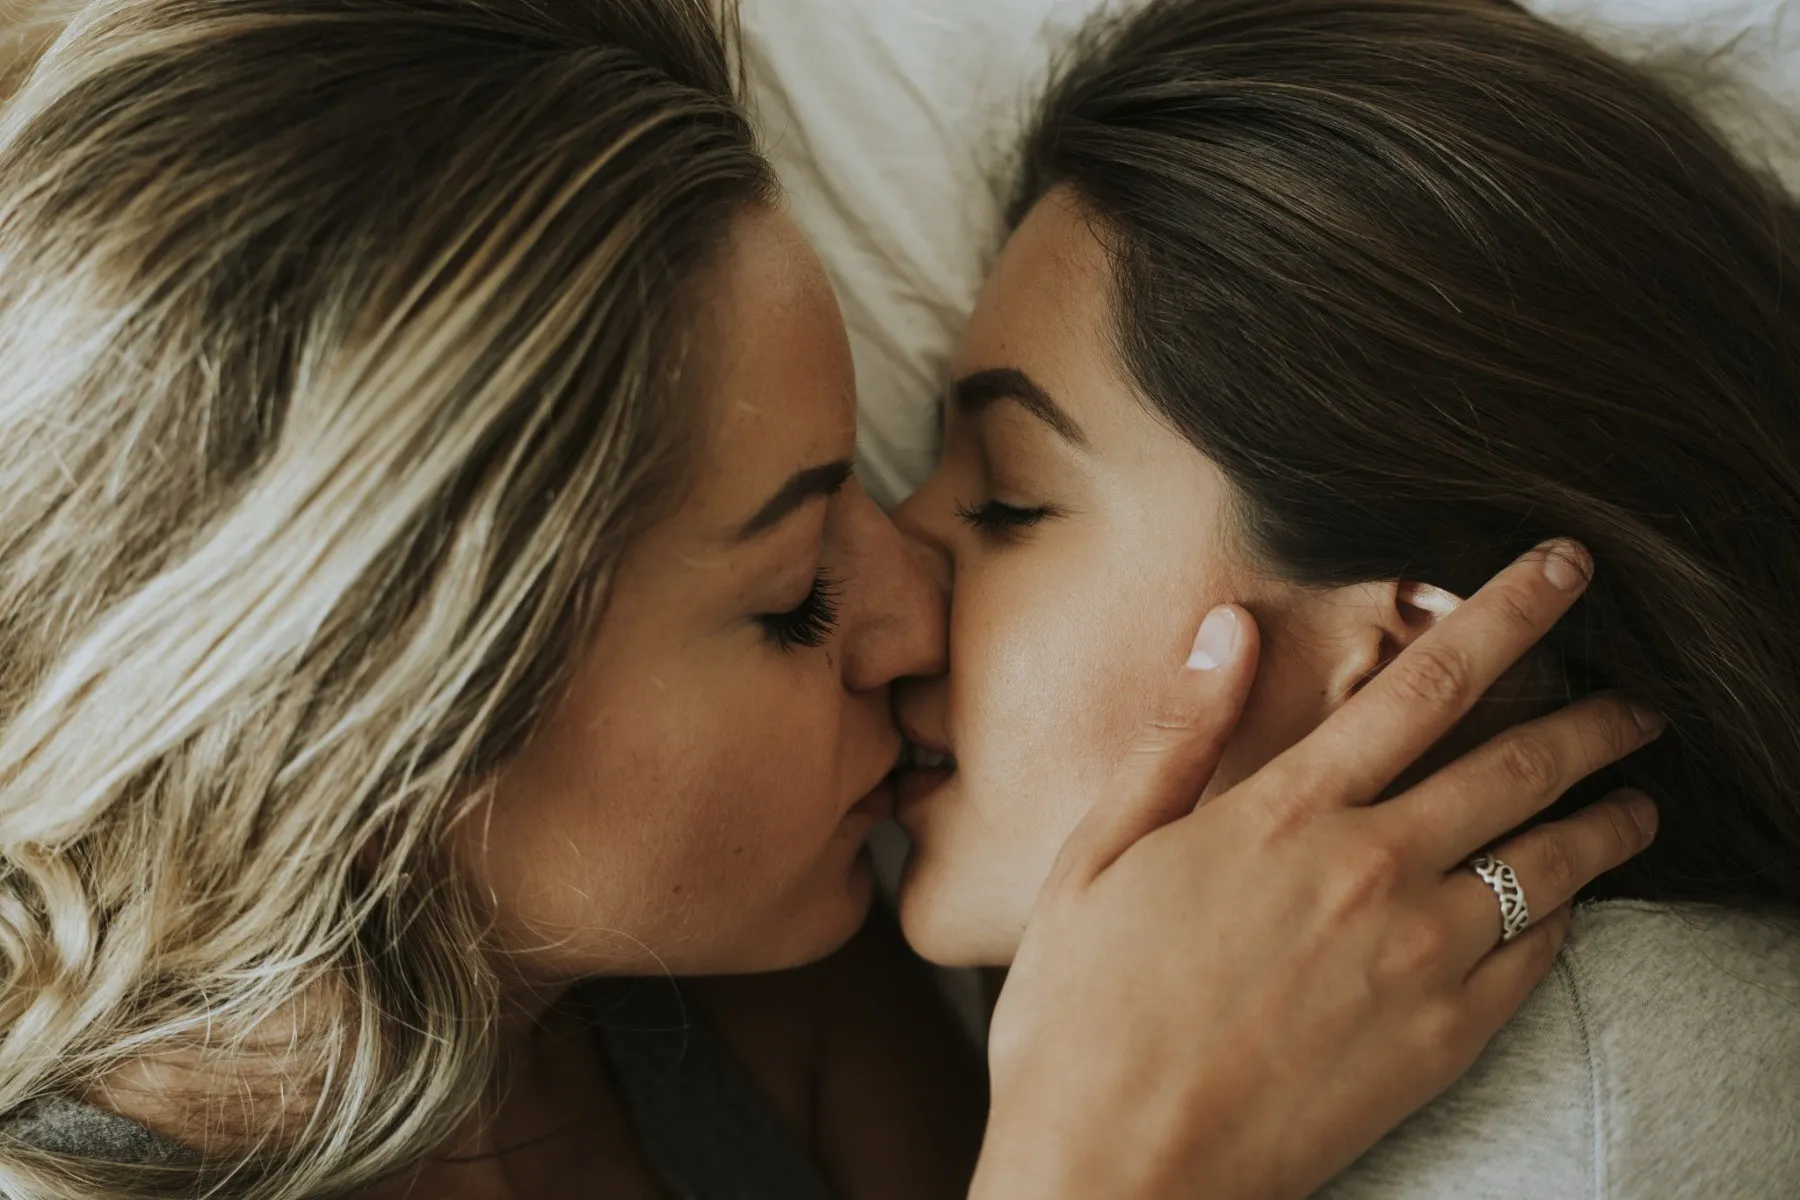 Two women kissing each other lovingly